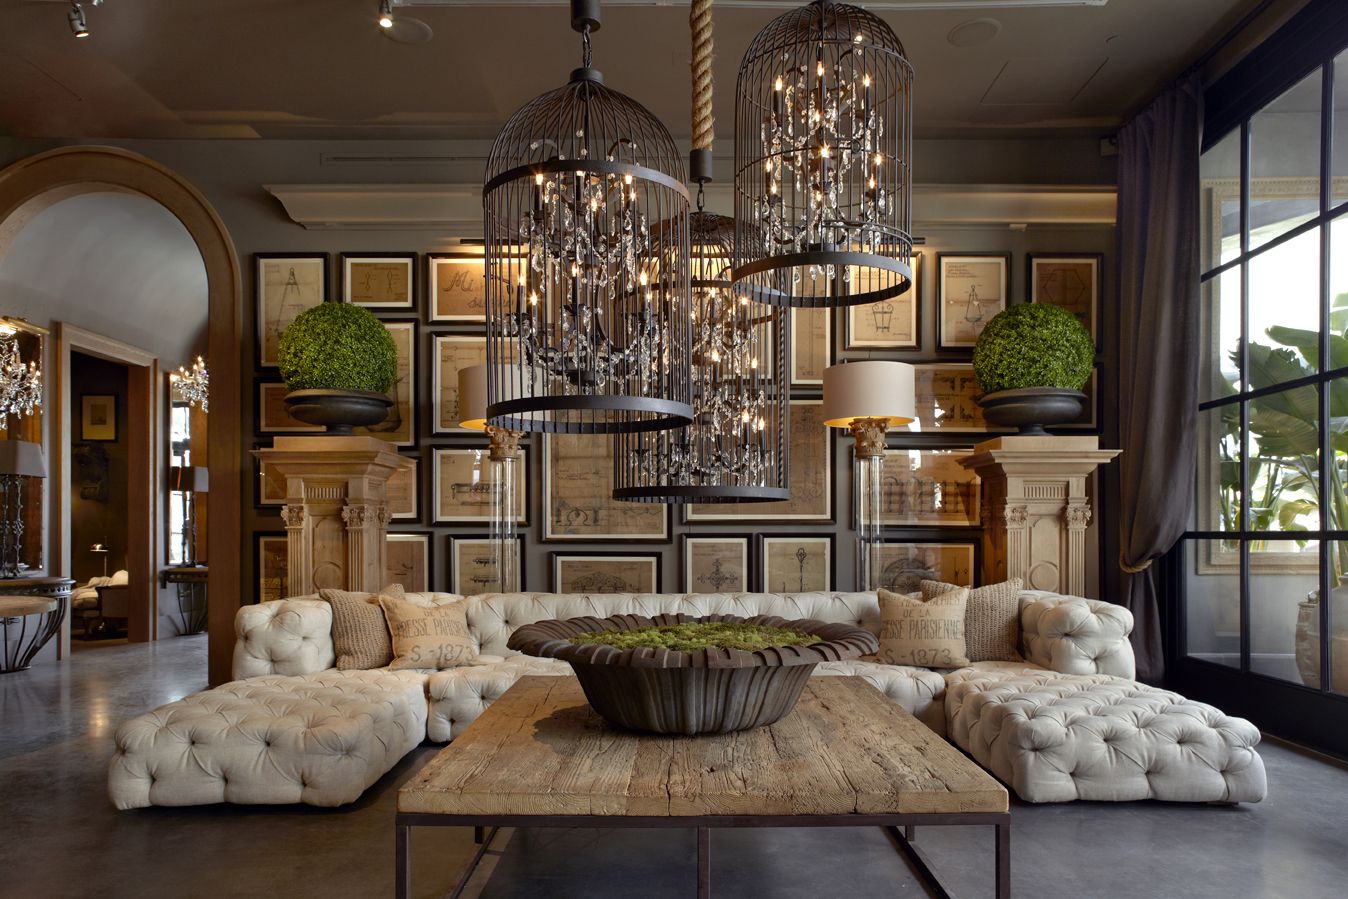 The floor showroom at RH showcasing a luxurious living room with chandeliers